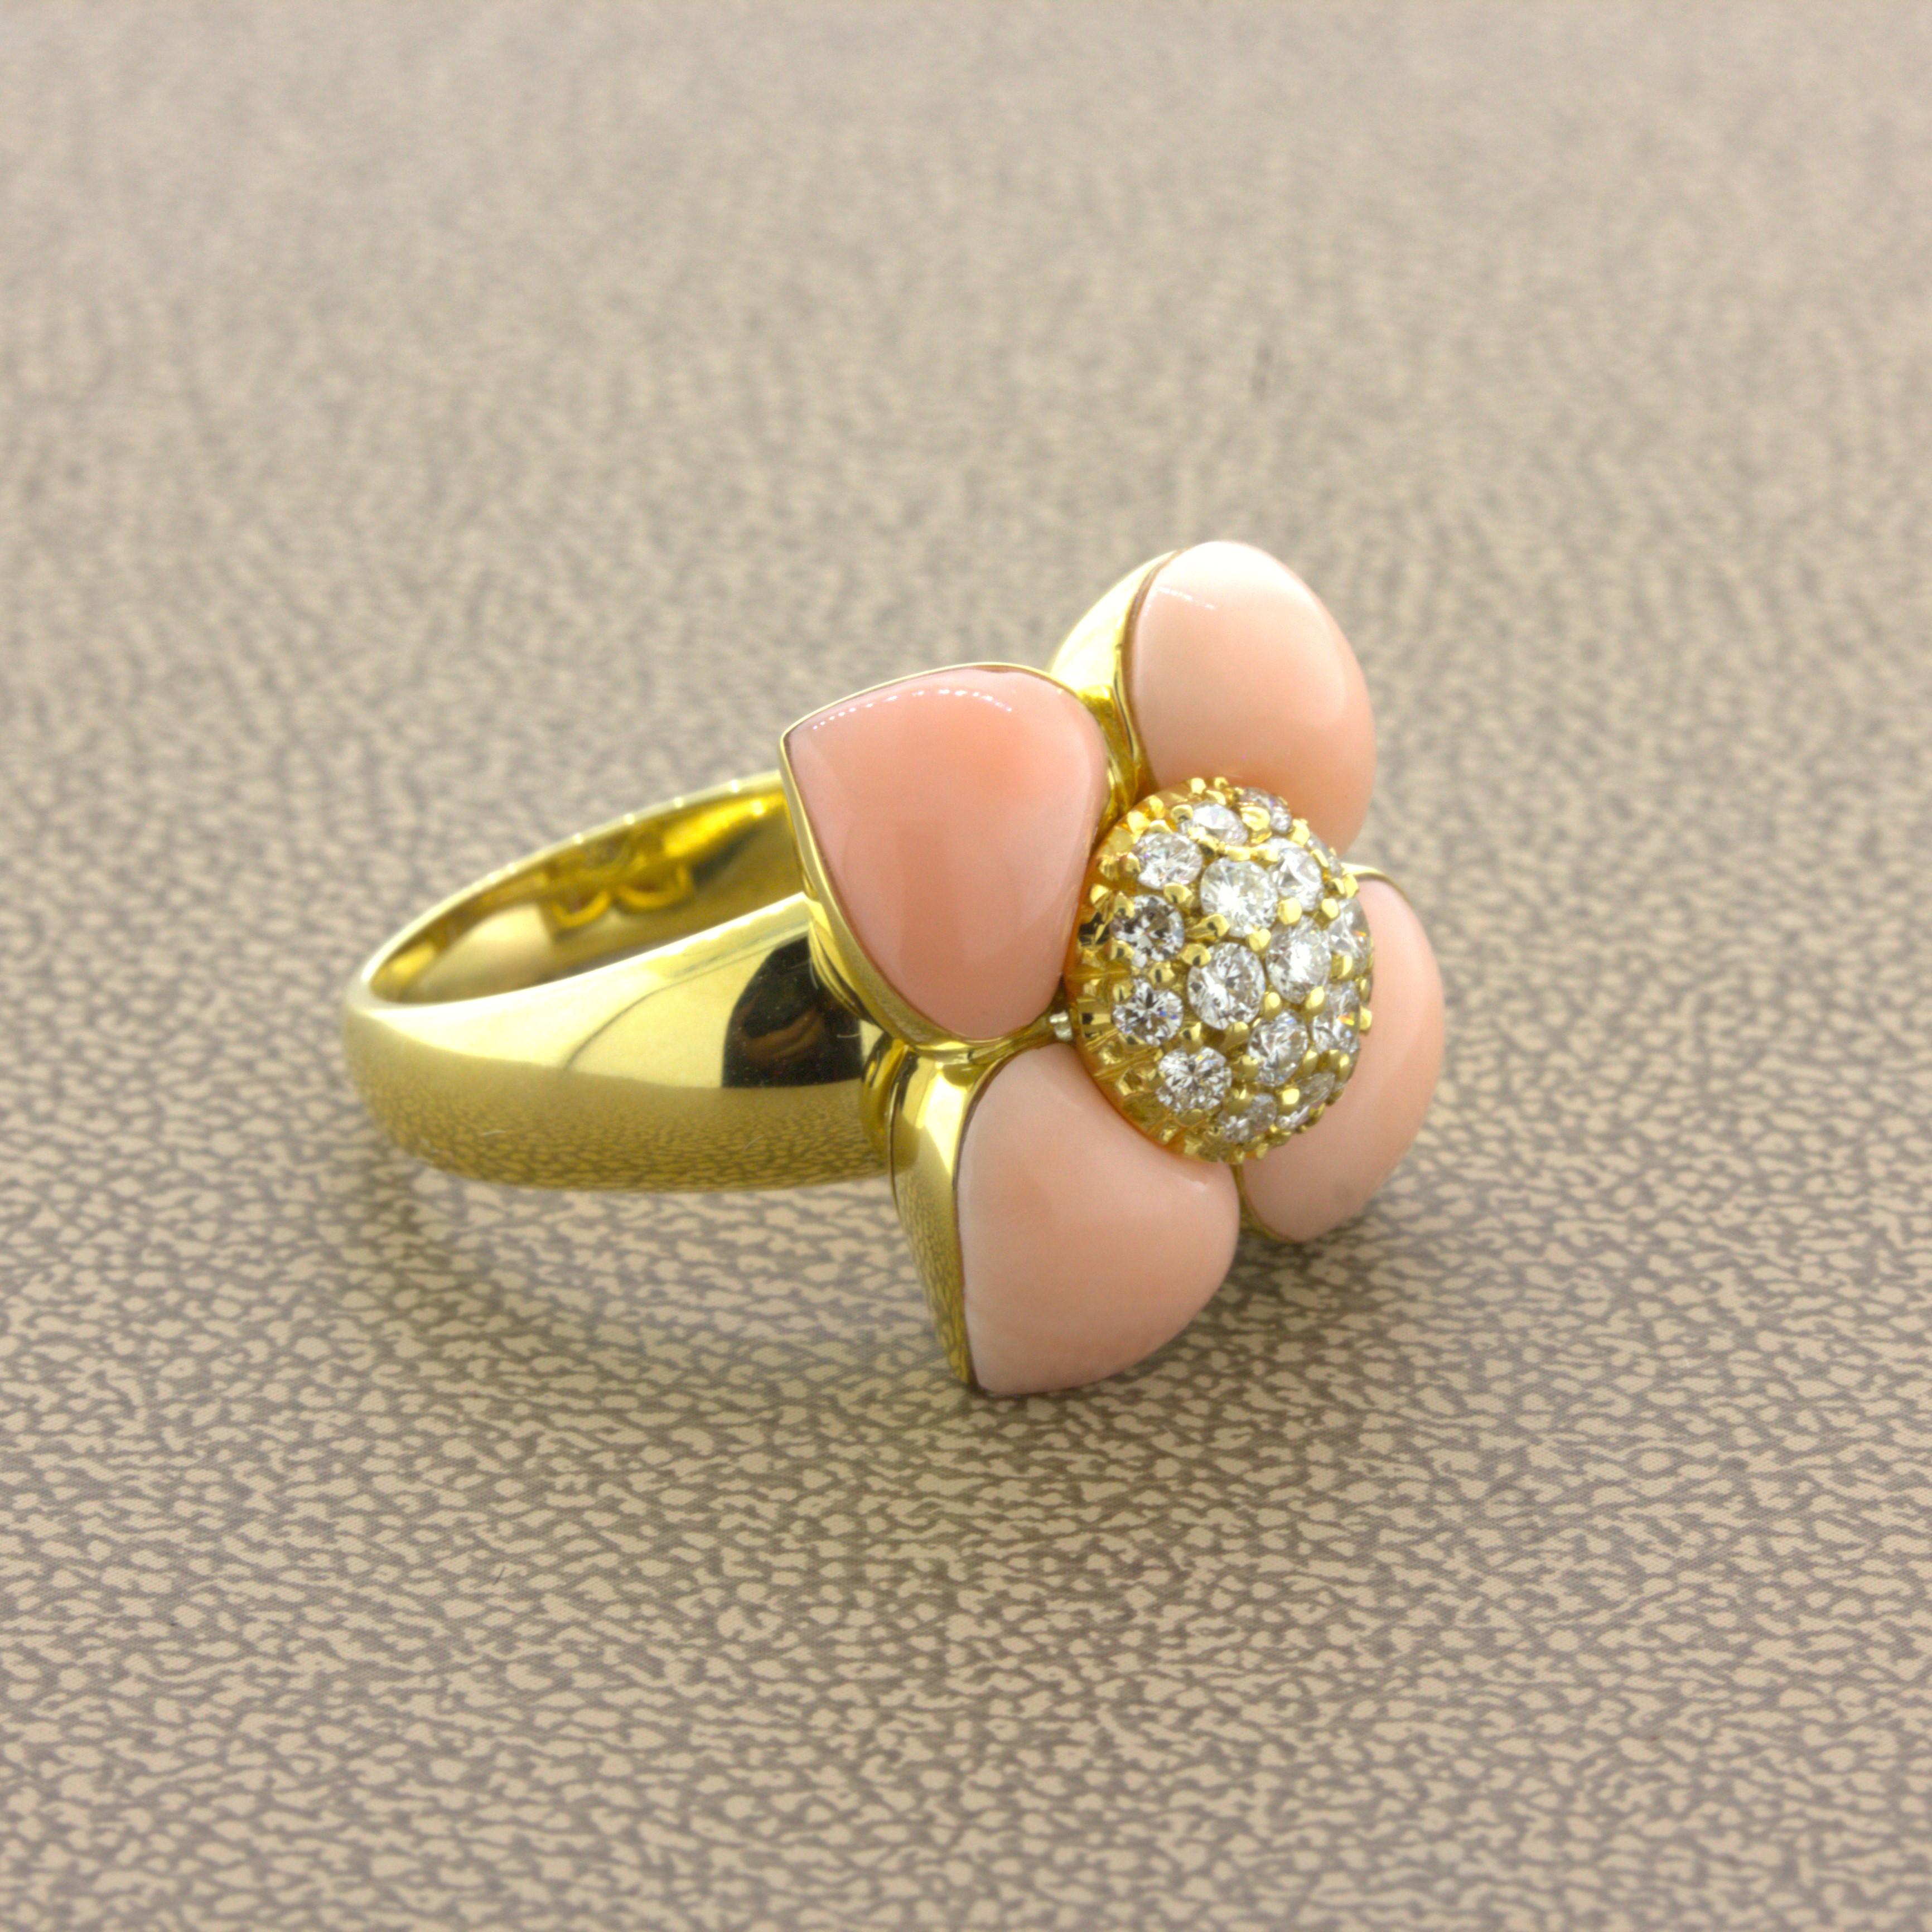 Cabochon Angel-Skin Coral Diamond 18Karat Yellow Gold Flower Ring For Sale